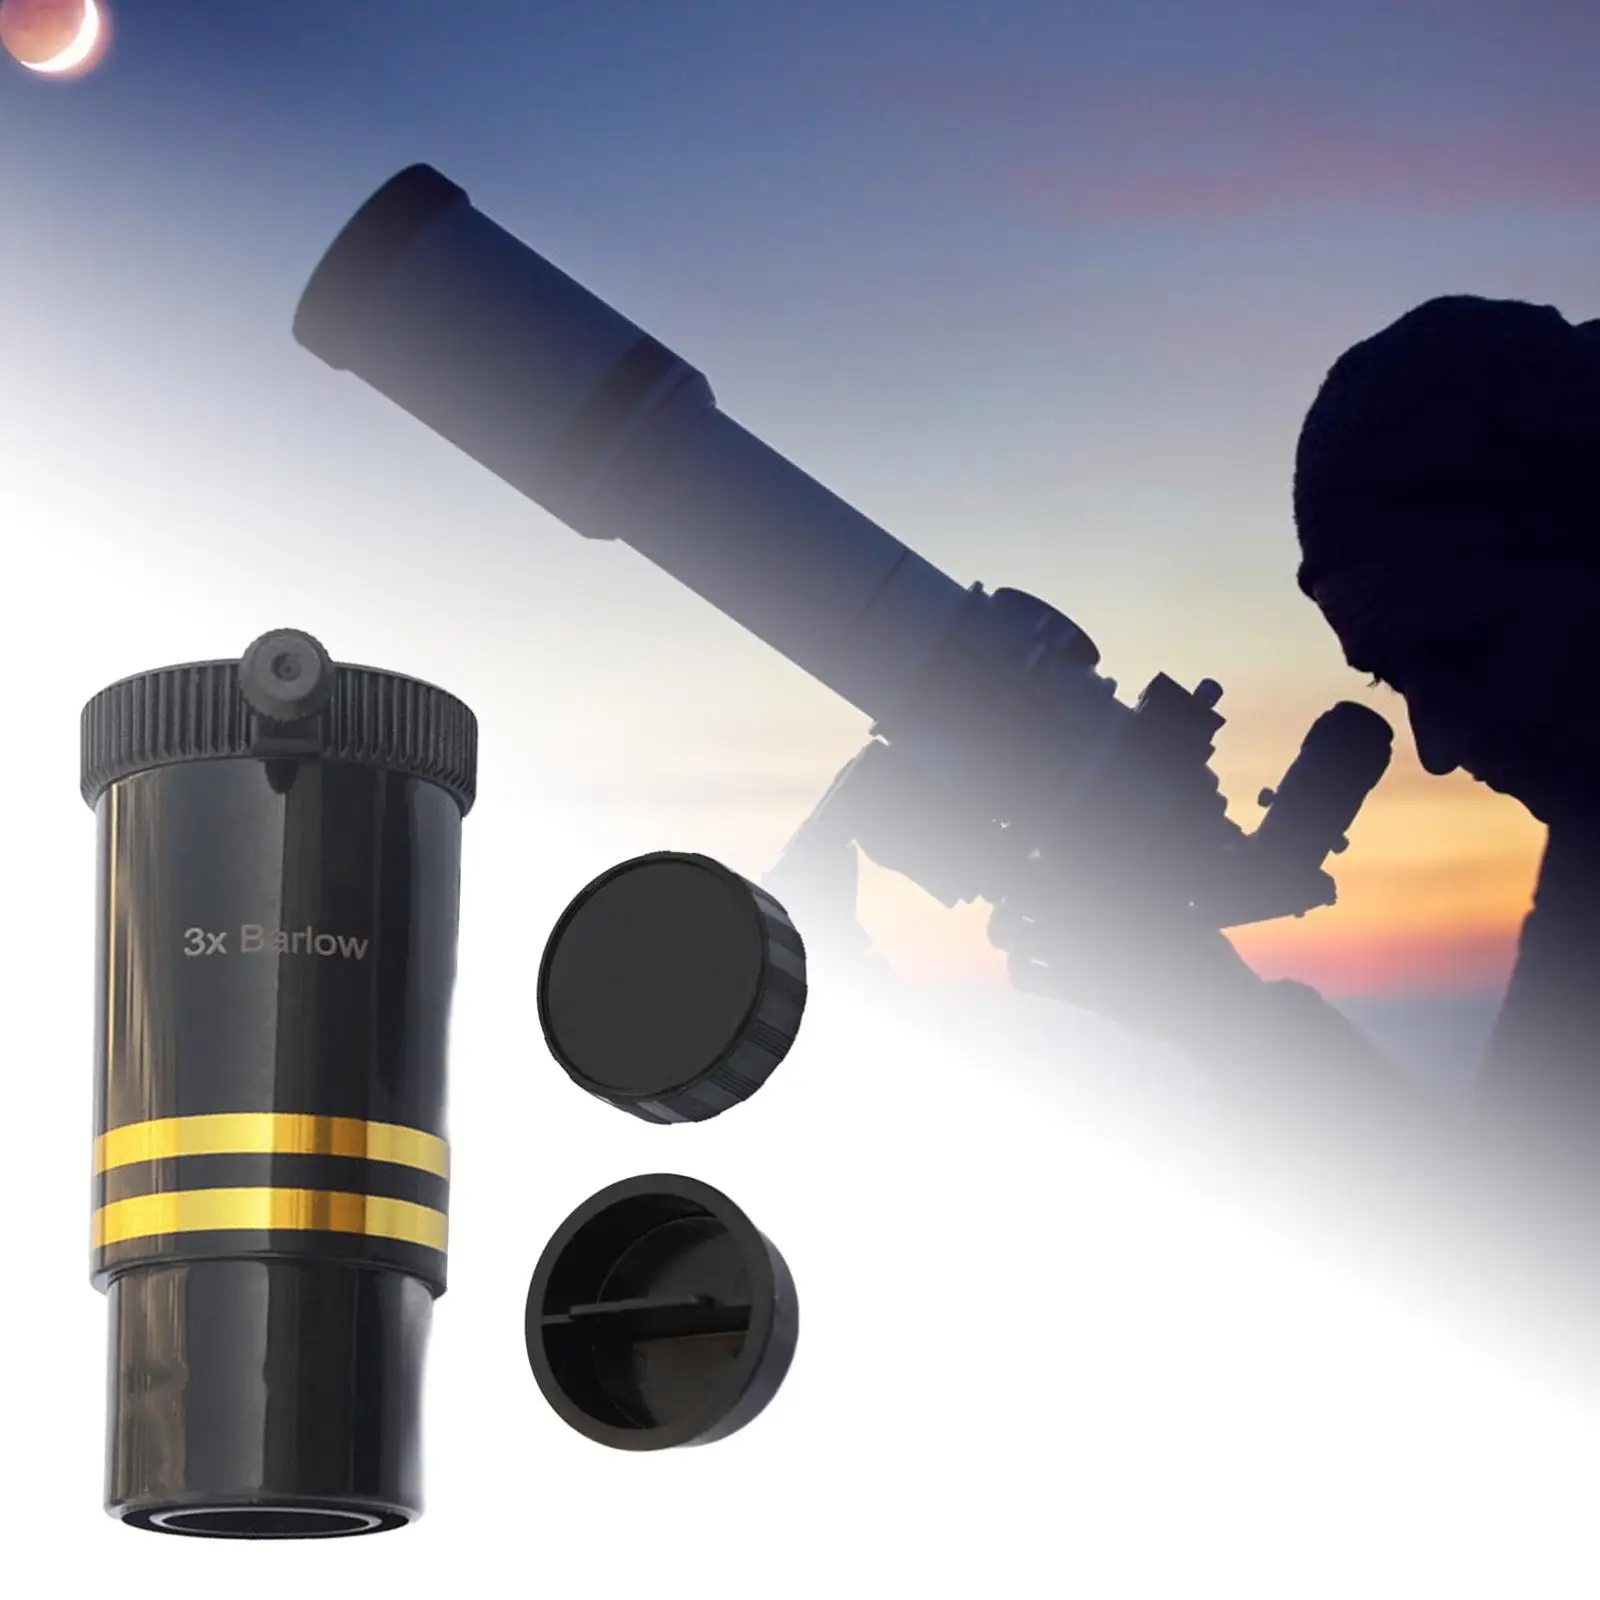 3x Barlow Lens Magnification Lens Achromatic Barlow Lens 1.25 Inches Telescope Accessory for Photography Astronomy Astronomical